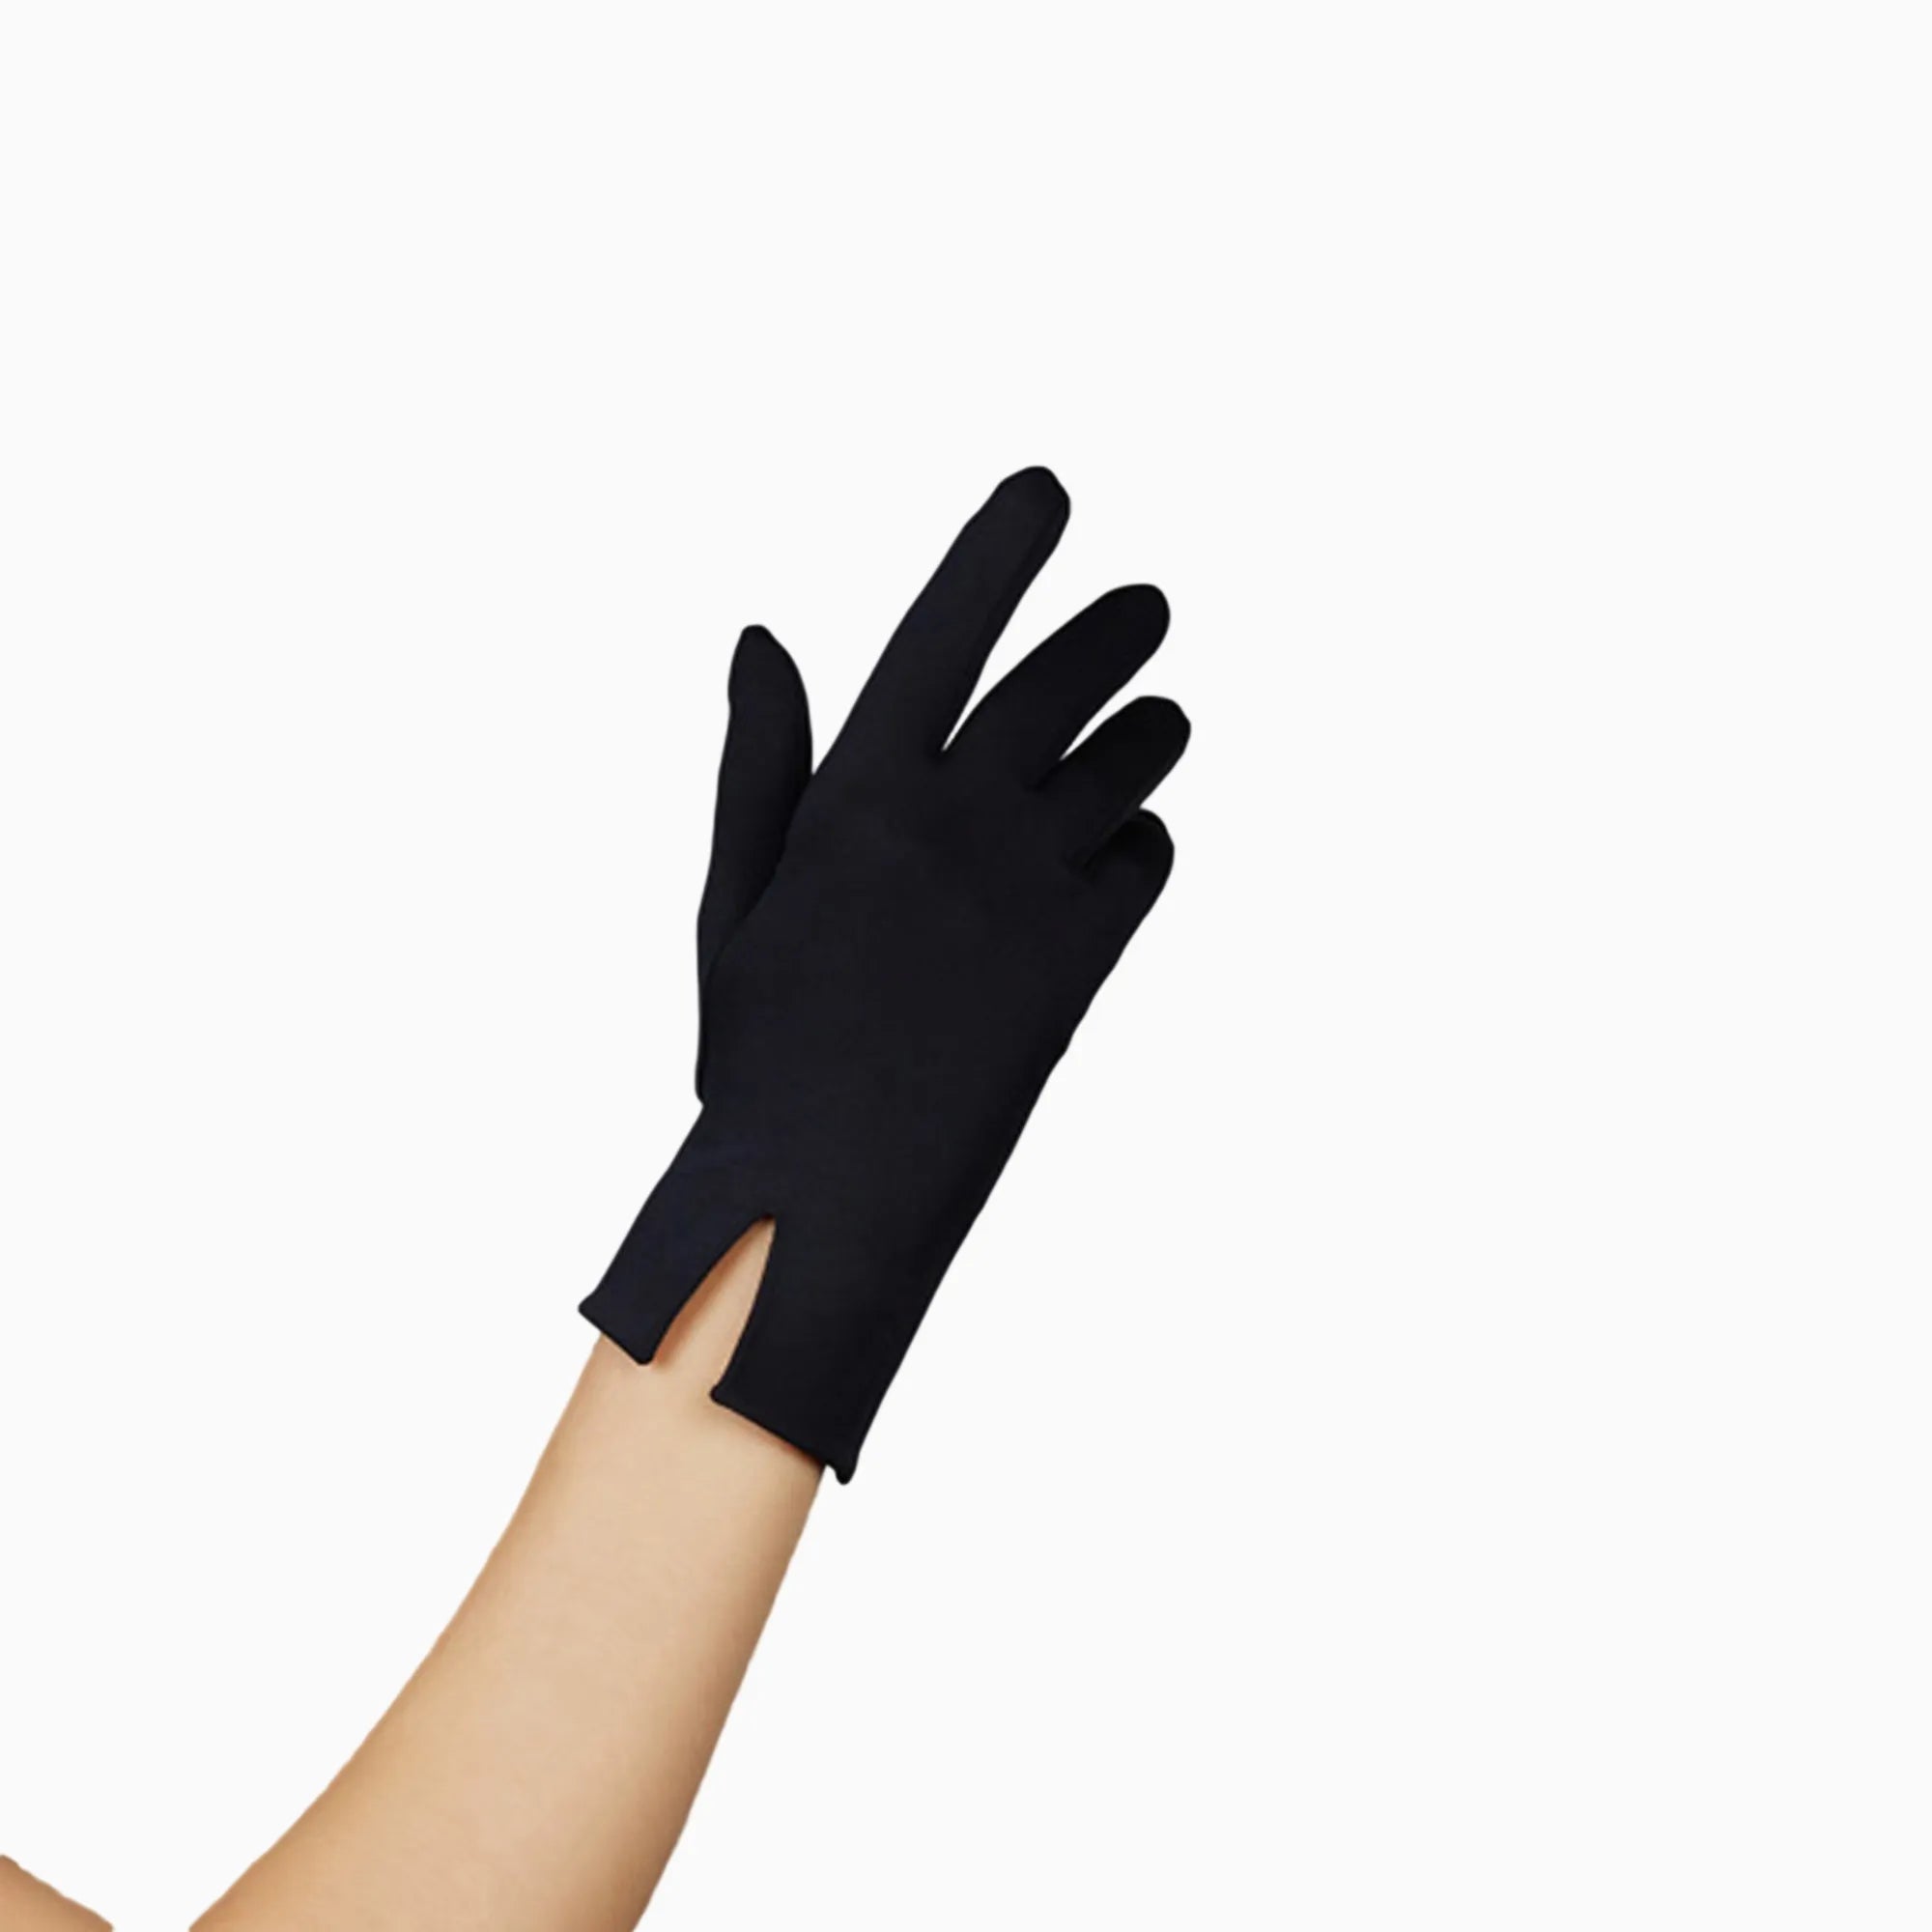 THE ISABELLE wrist day glove in black.